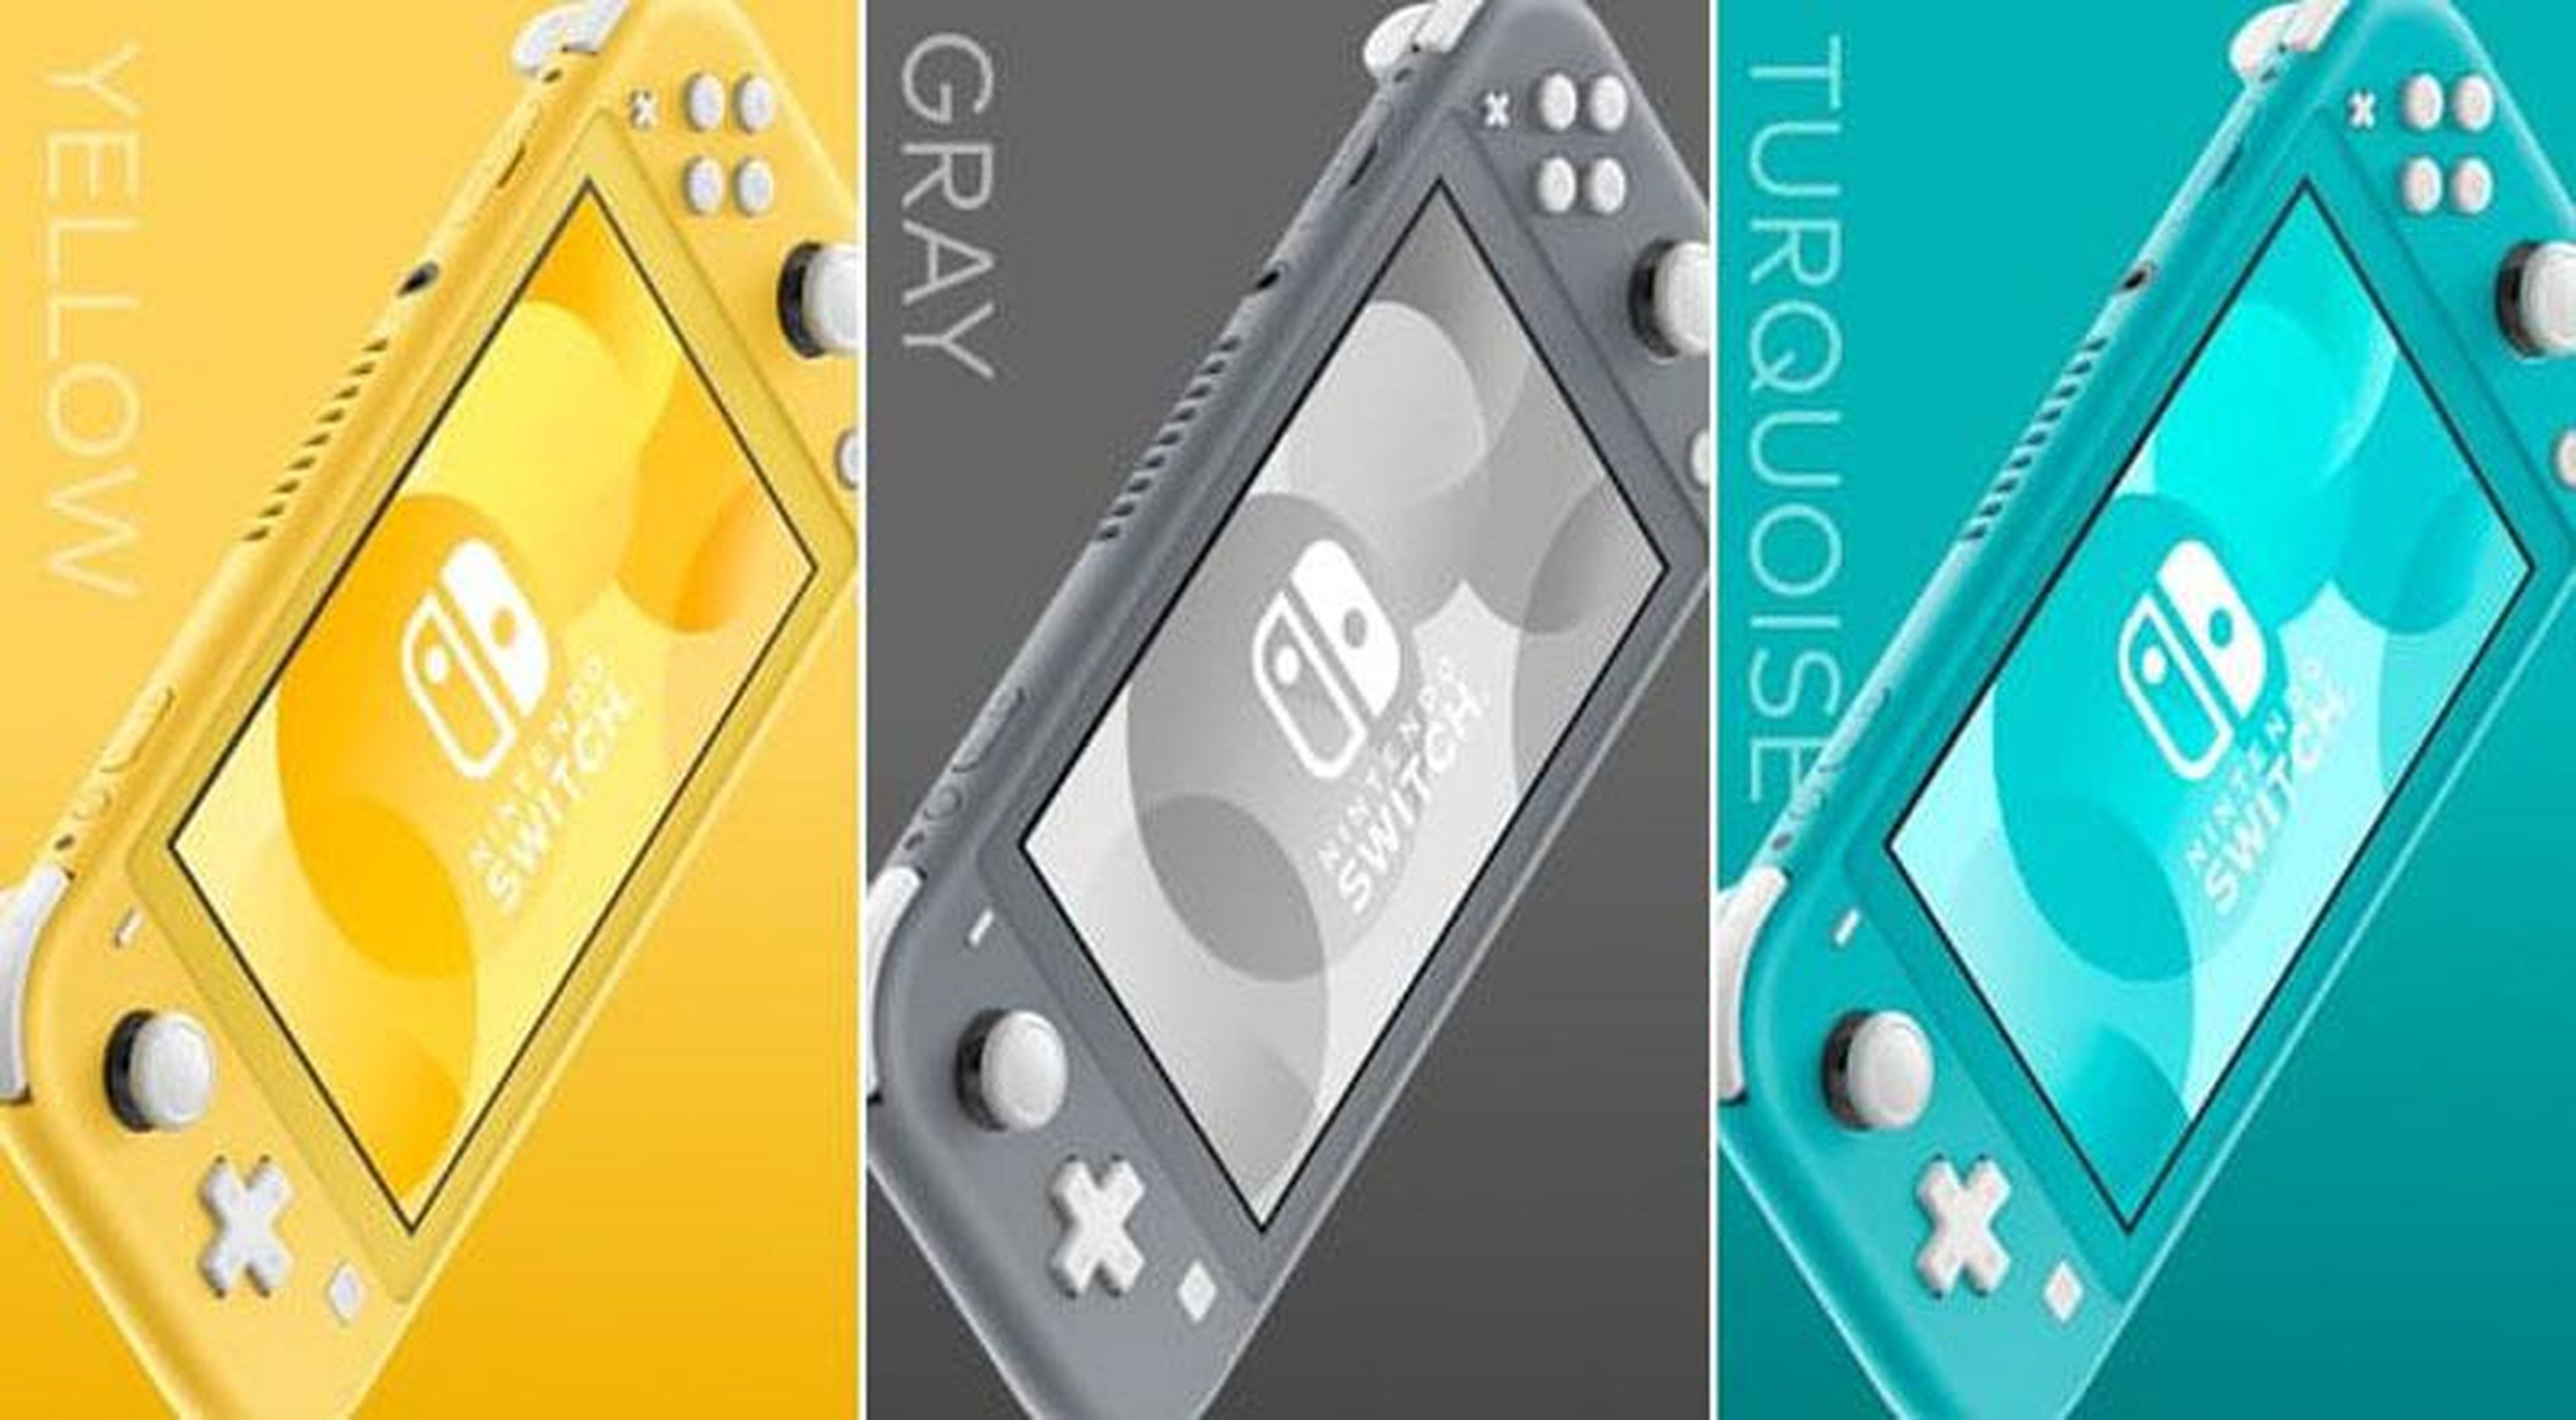 6. The Switch Lite comes in three colors: Yellow, Grey, and Turquoise.